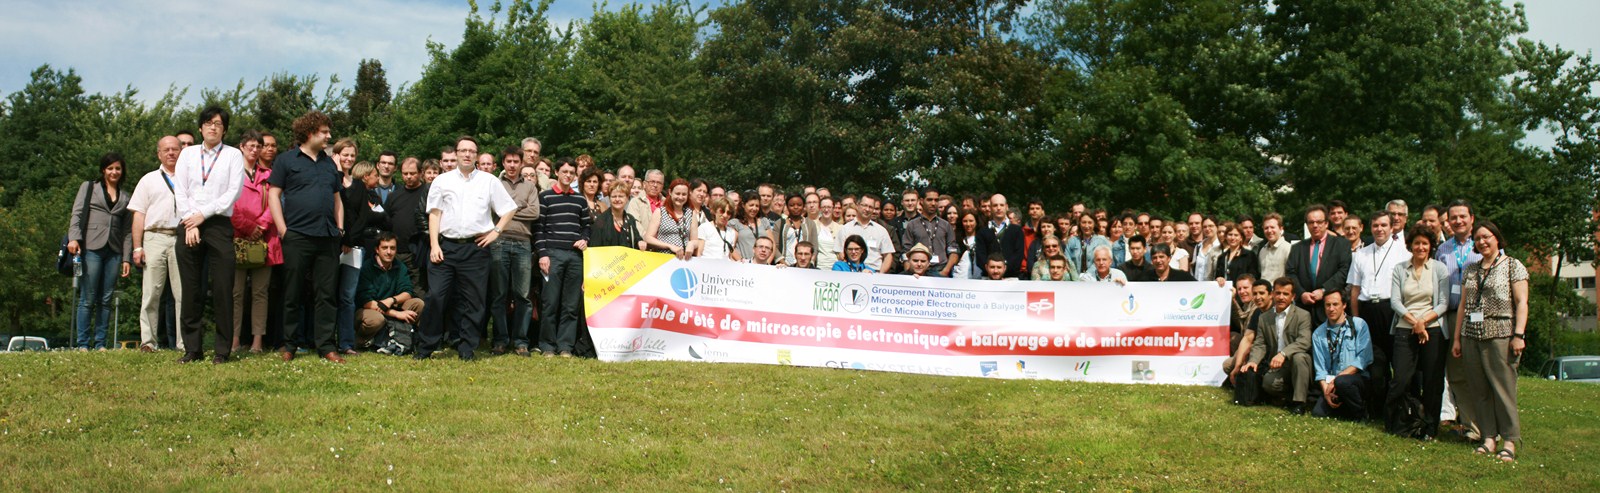 groupe-lille-2012